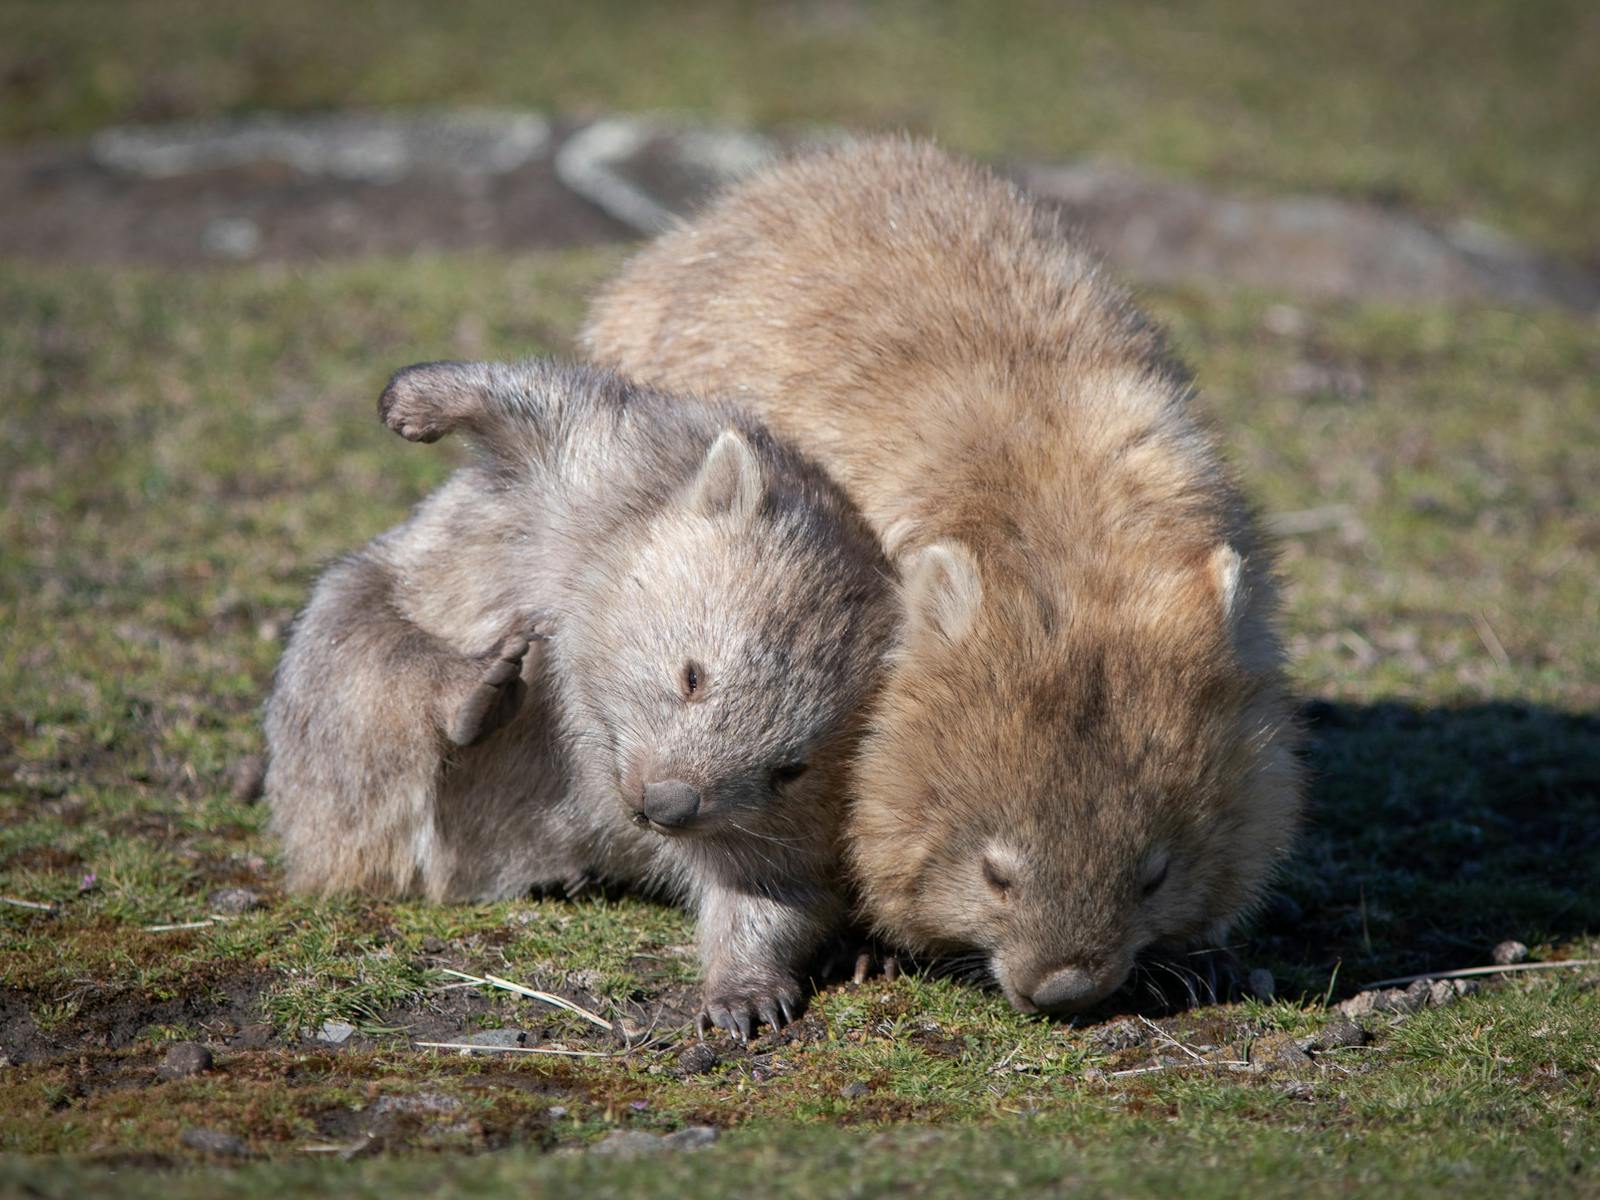 Mother wombat grazing on grass, with her baby leaning against her scratching itself.